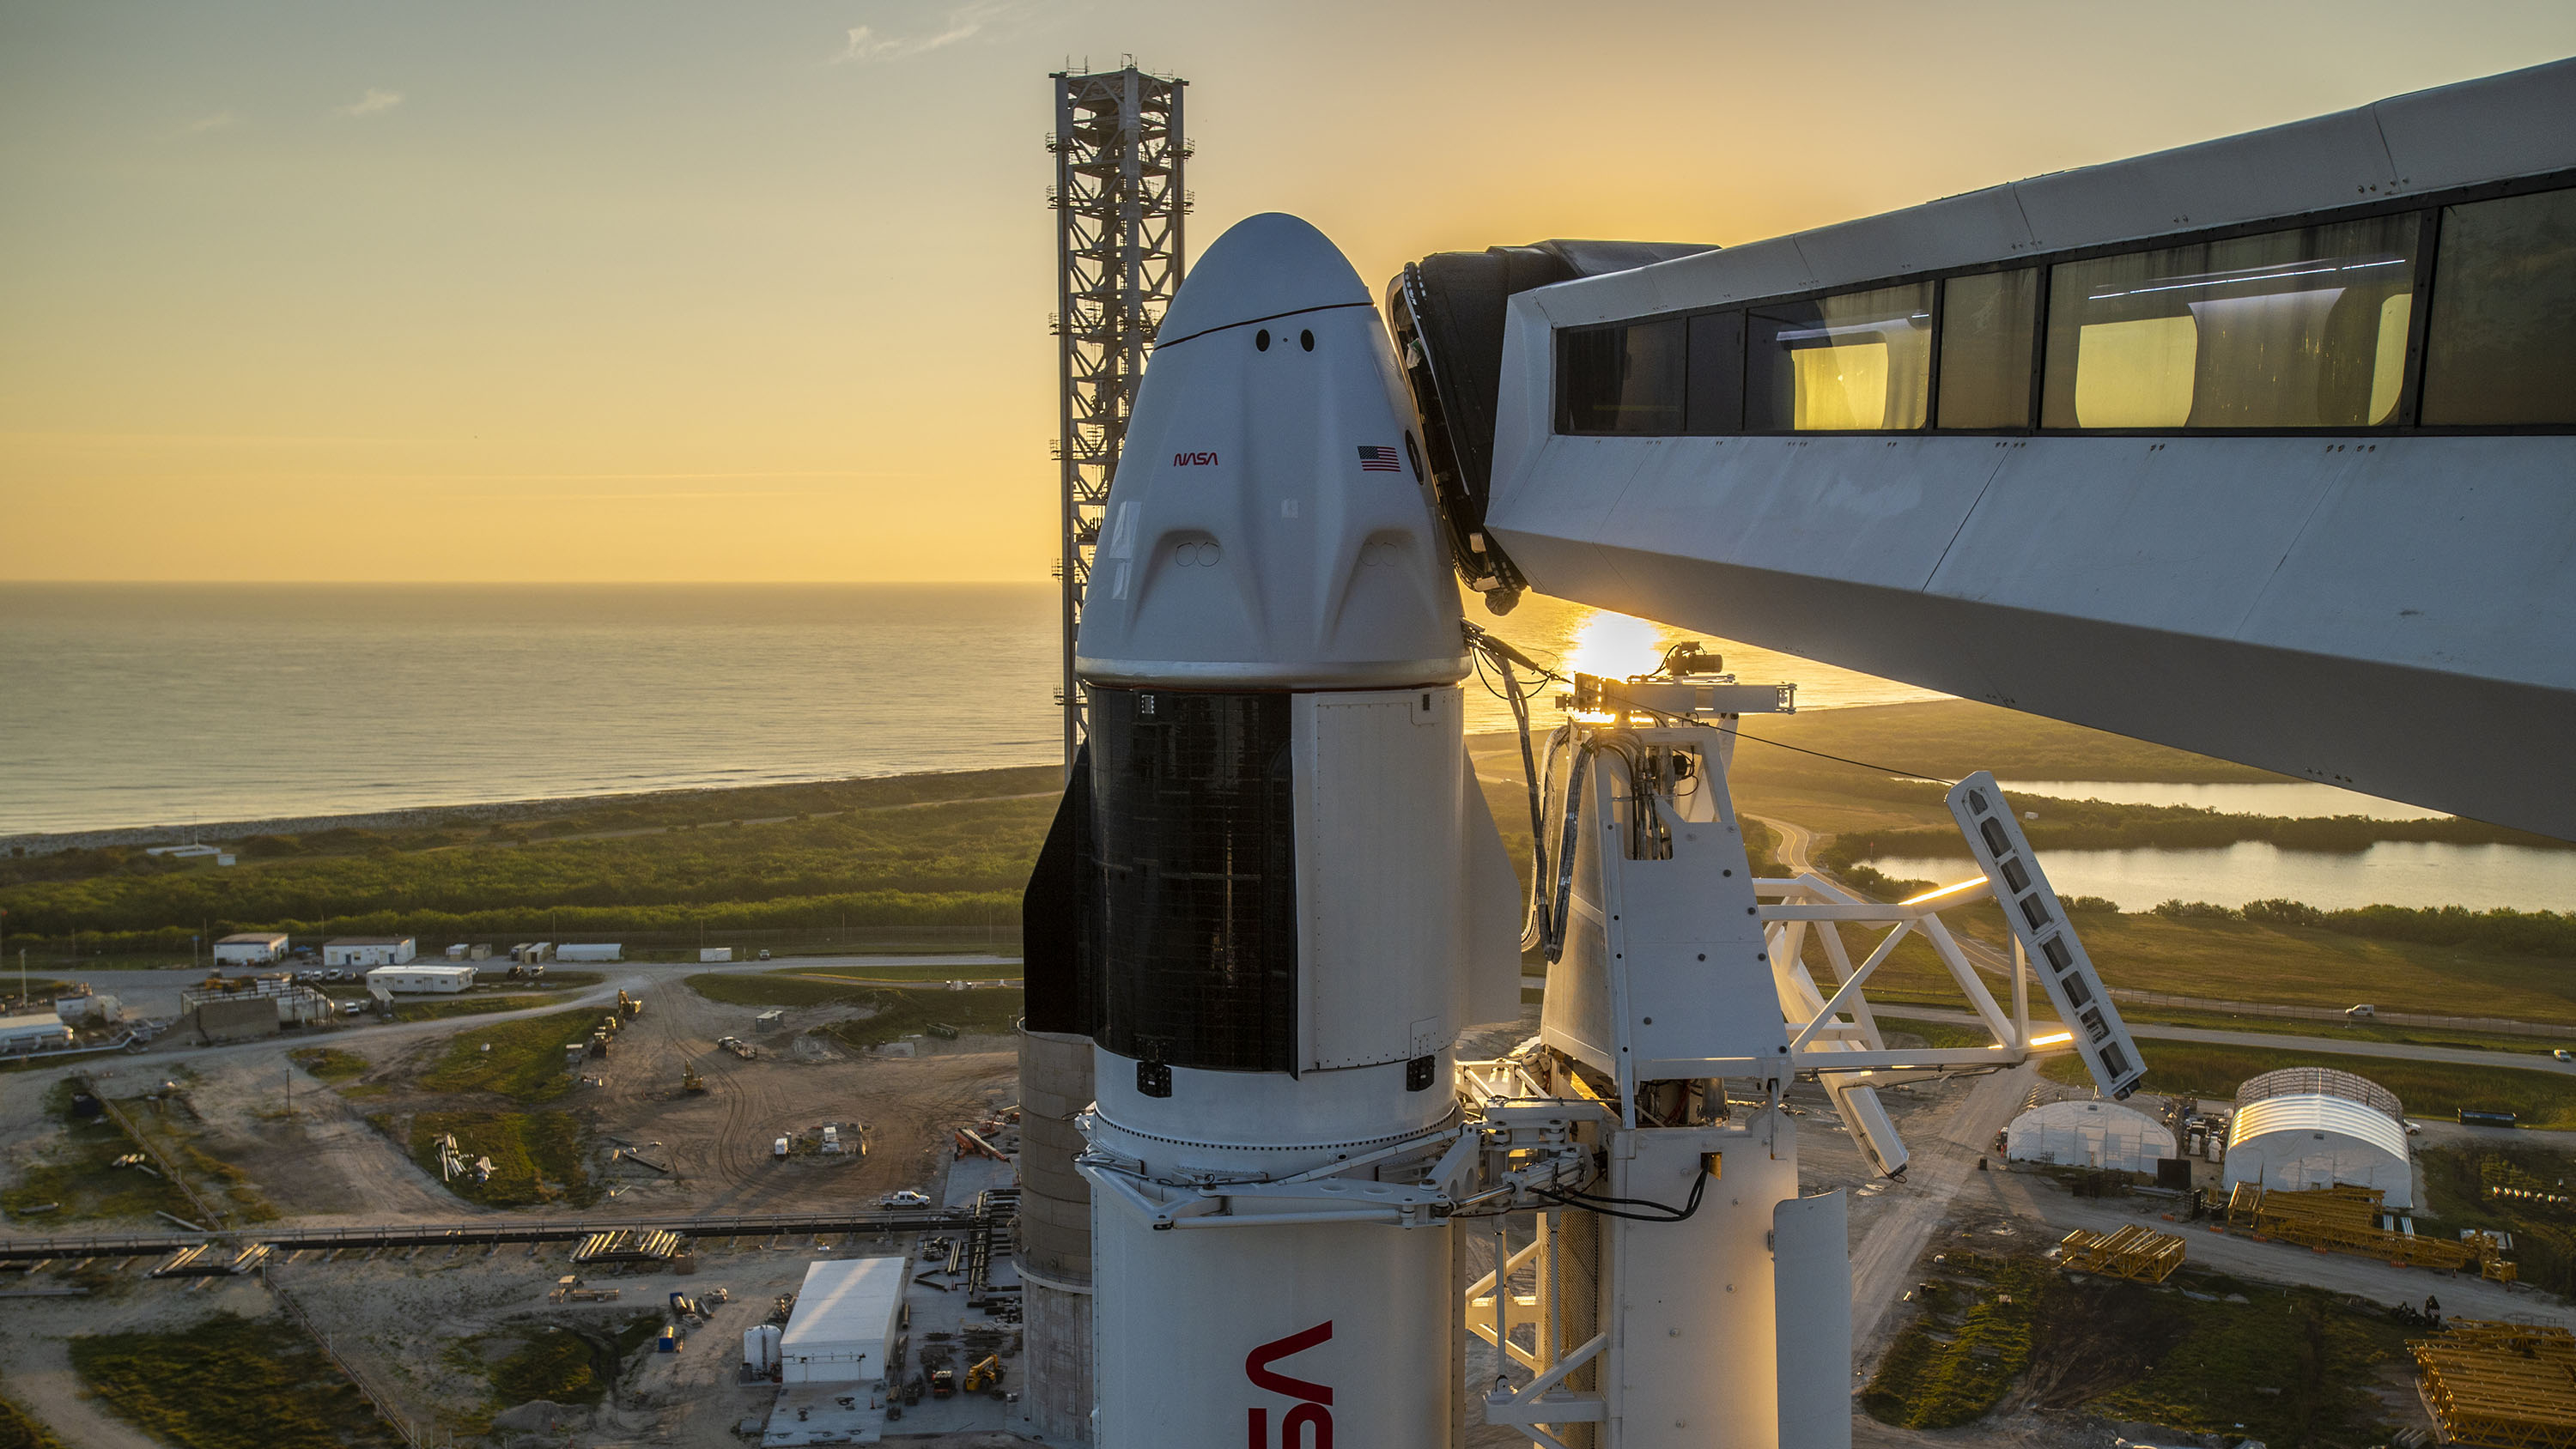 The sun rises behind SpaceX's Crew Dragon Endeavour and Falcon 9 rocket at Launch Pad 39A of NASA's Kennedy Space Center for Crew-6.